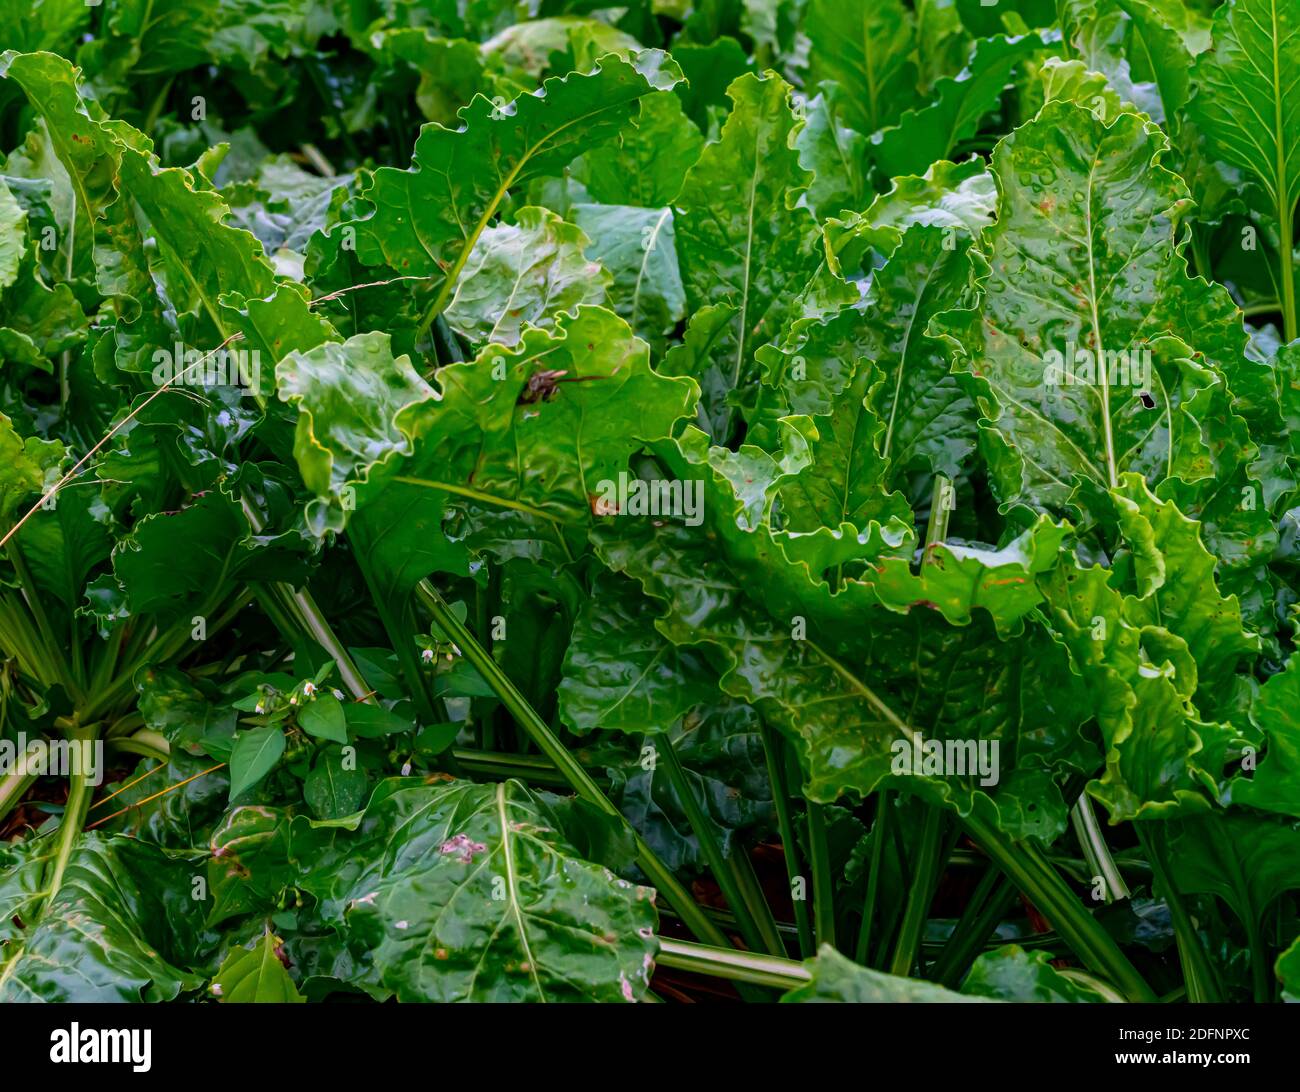 Sugar beet plants on a field, ready for harvest.  Stock Photo